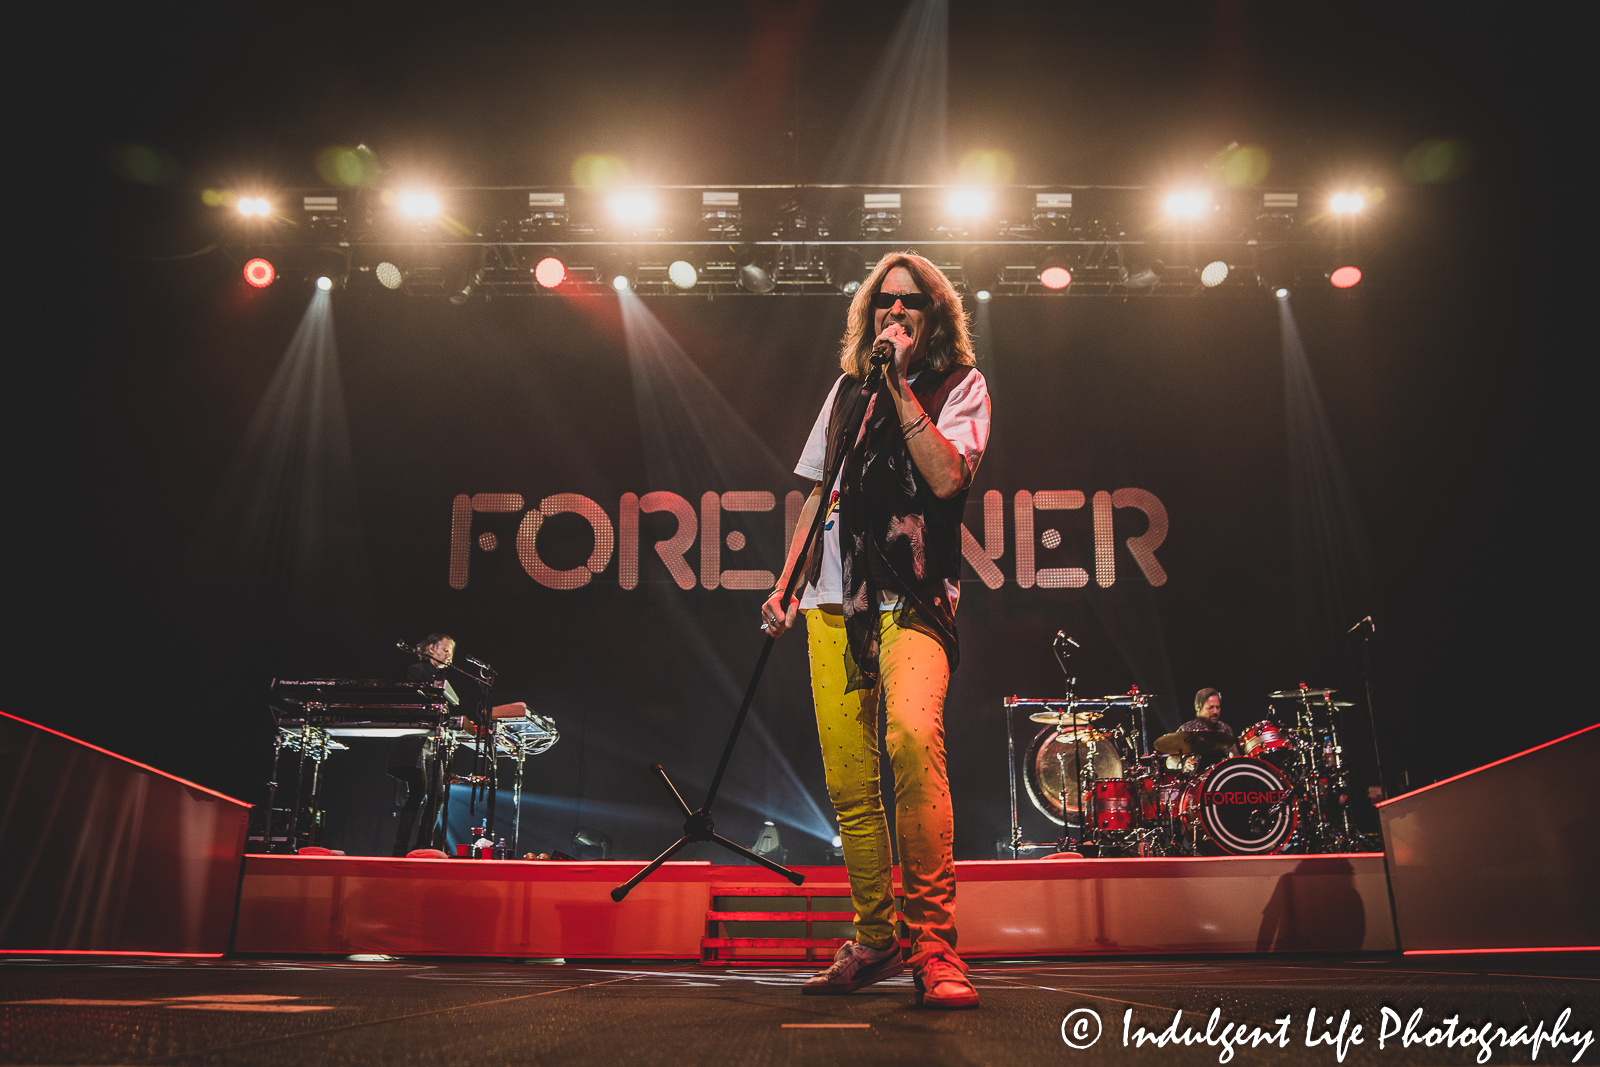 Foreigner frontman Kelly Hansen performing "Double Vision" with keyboard player Michael Bluestein and drummer Chris Frazier at Landon Arena inside of Stormont Vail Events Center in Topeka, KS on May 2, 2023.